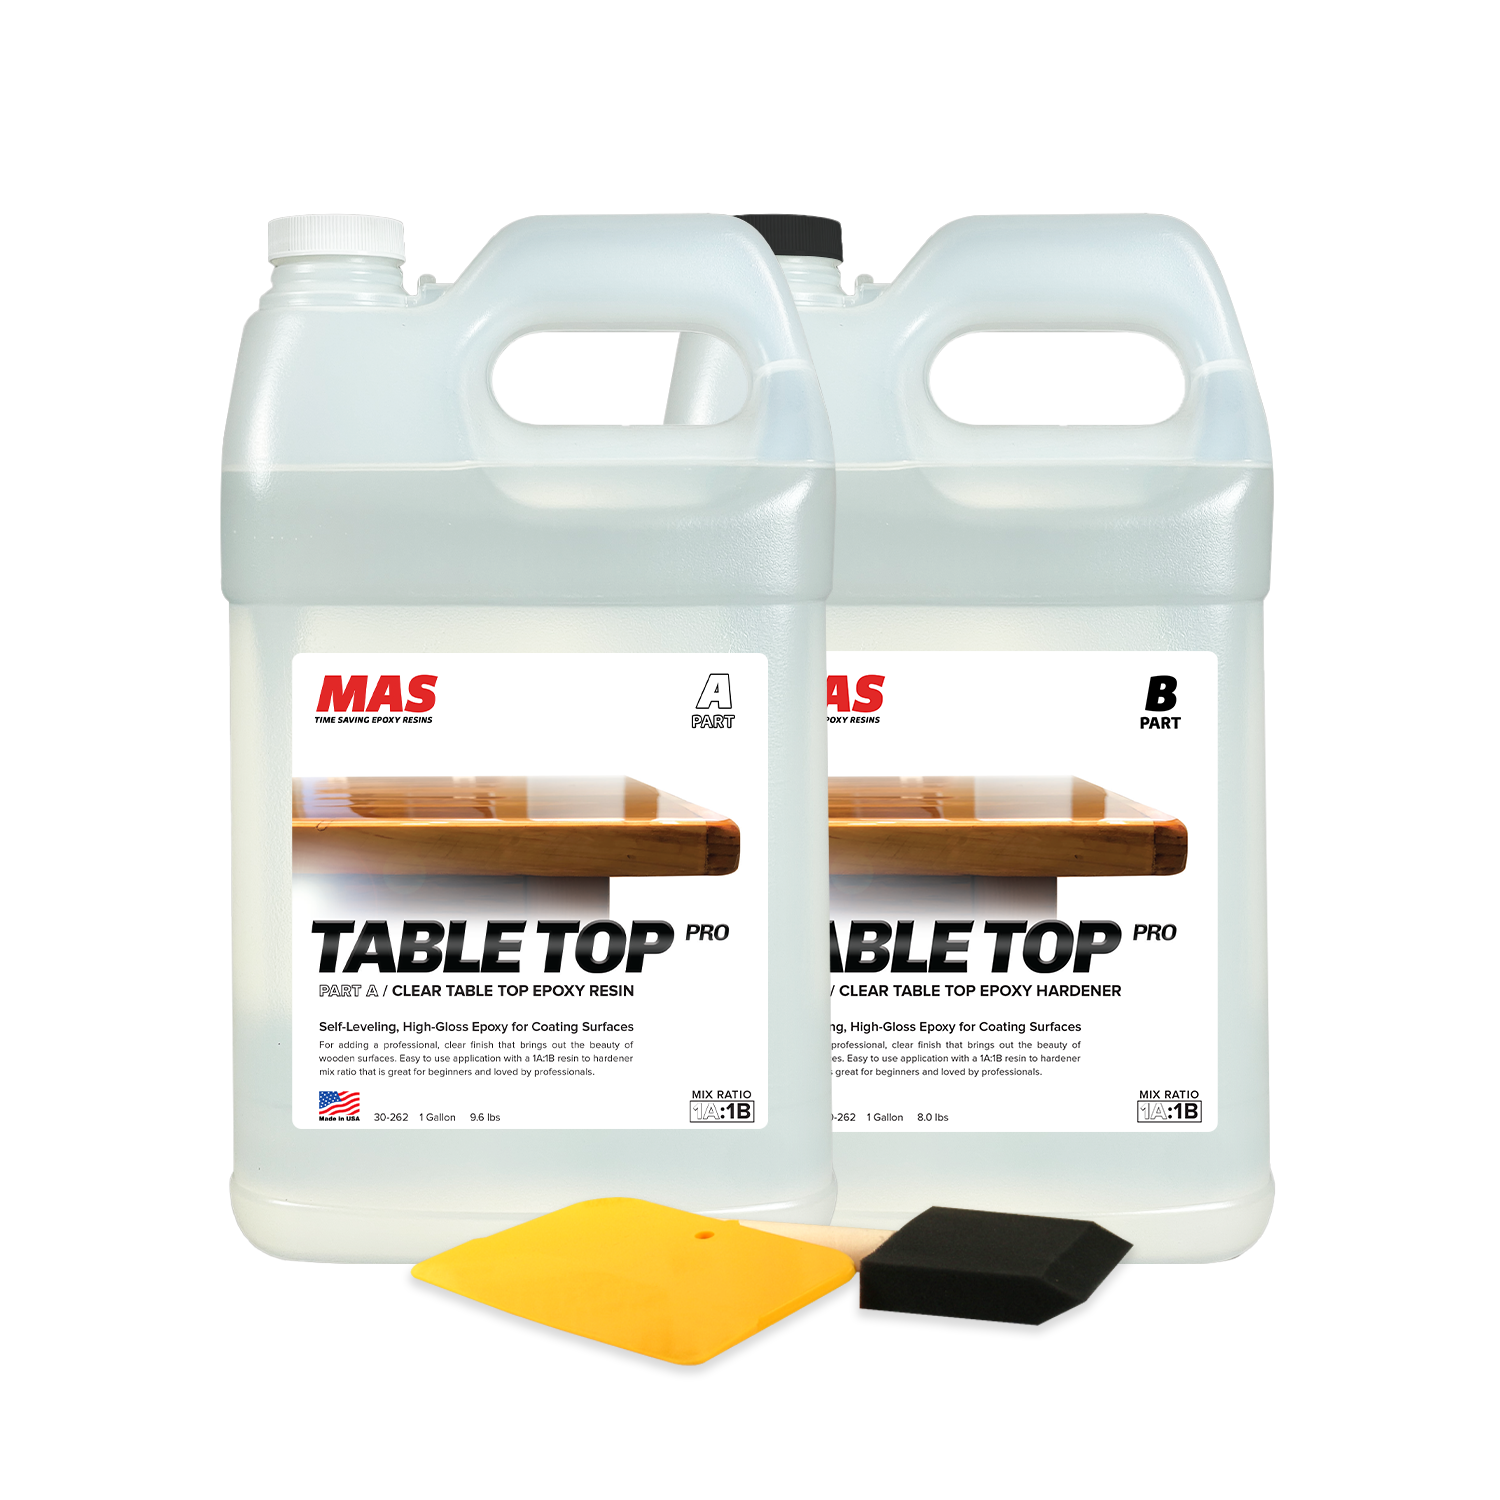 Is there a fast hardener for the 1;1 Table Top Pro resin?